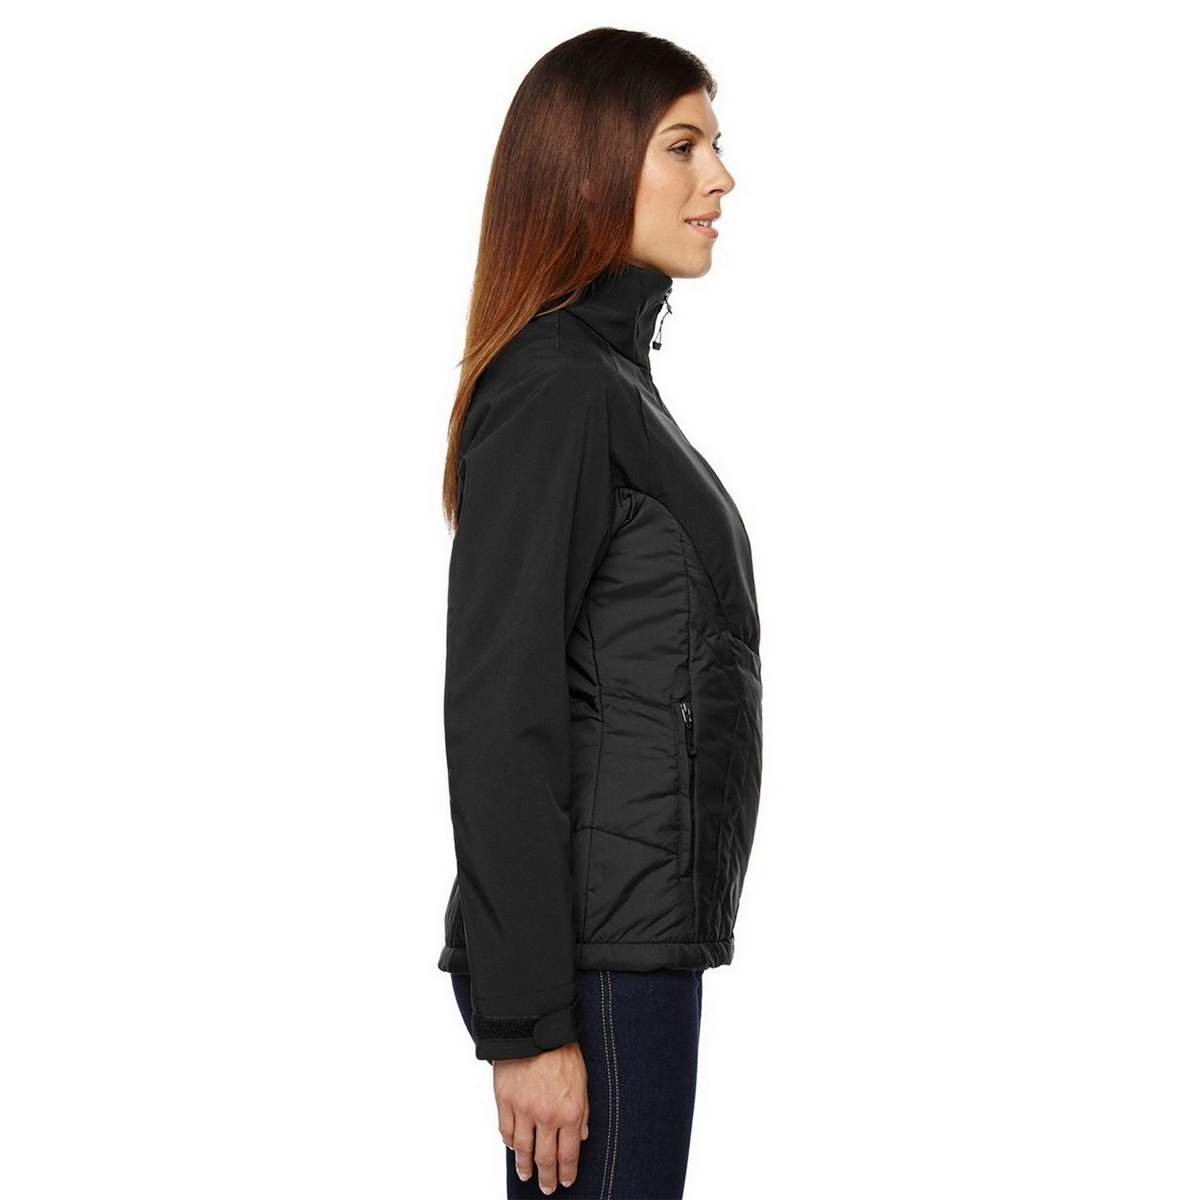 NORTH END LADIES INNOVATE INSULATED HYBRID SOFT SHELL JACKET